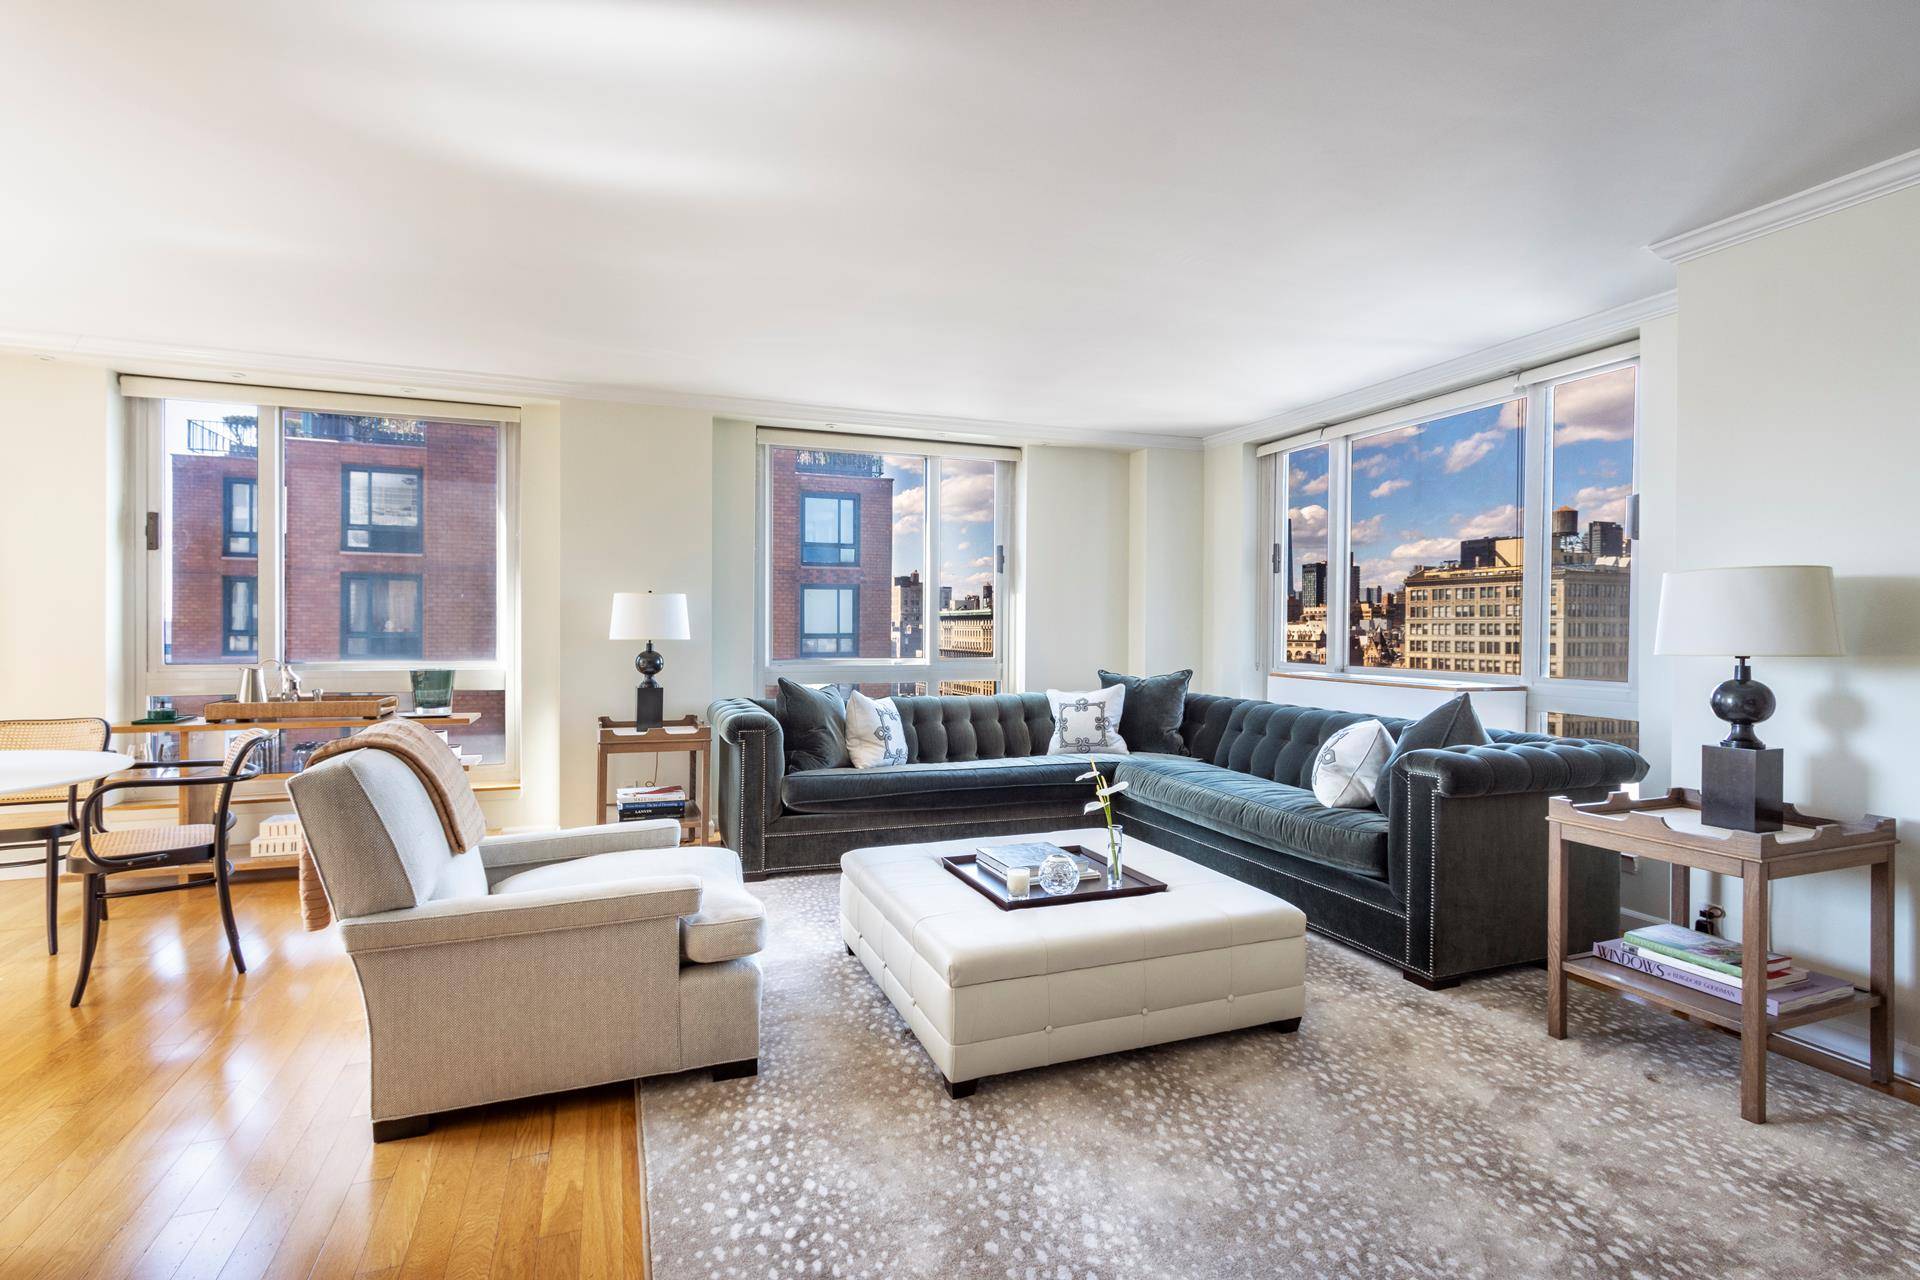 Located on the 20th floor of the famed Zeckendorf Towers in the heart of vibrant Union Square, this gorgeous 3 bedroom, 2 bathroom home features some of the best views ...